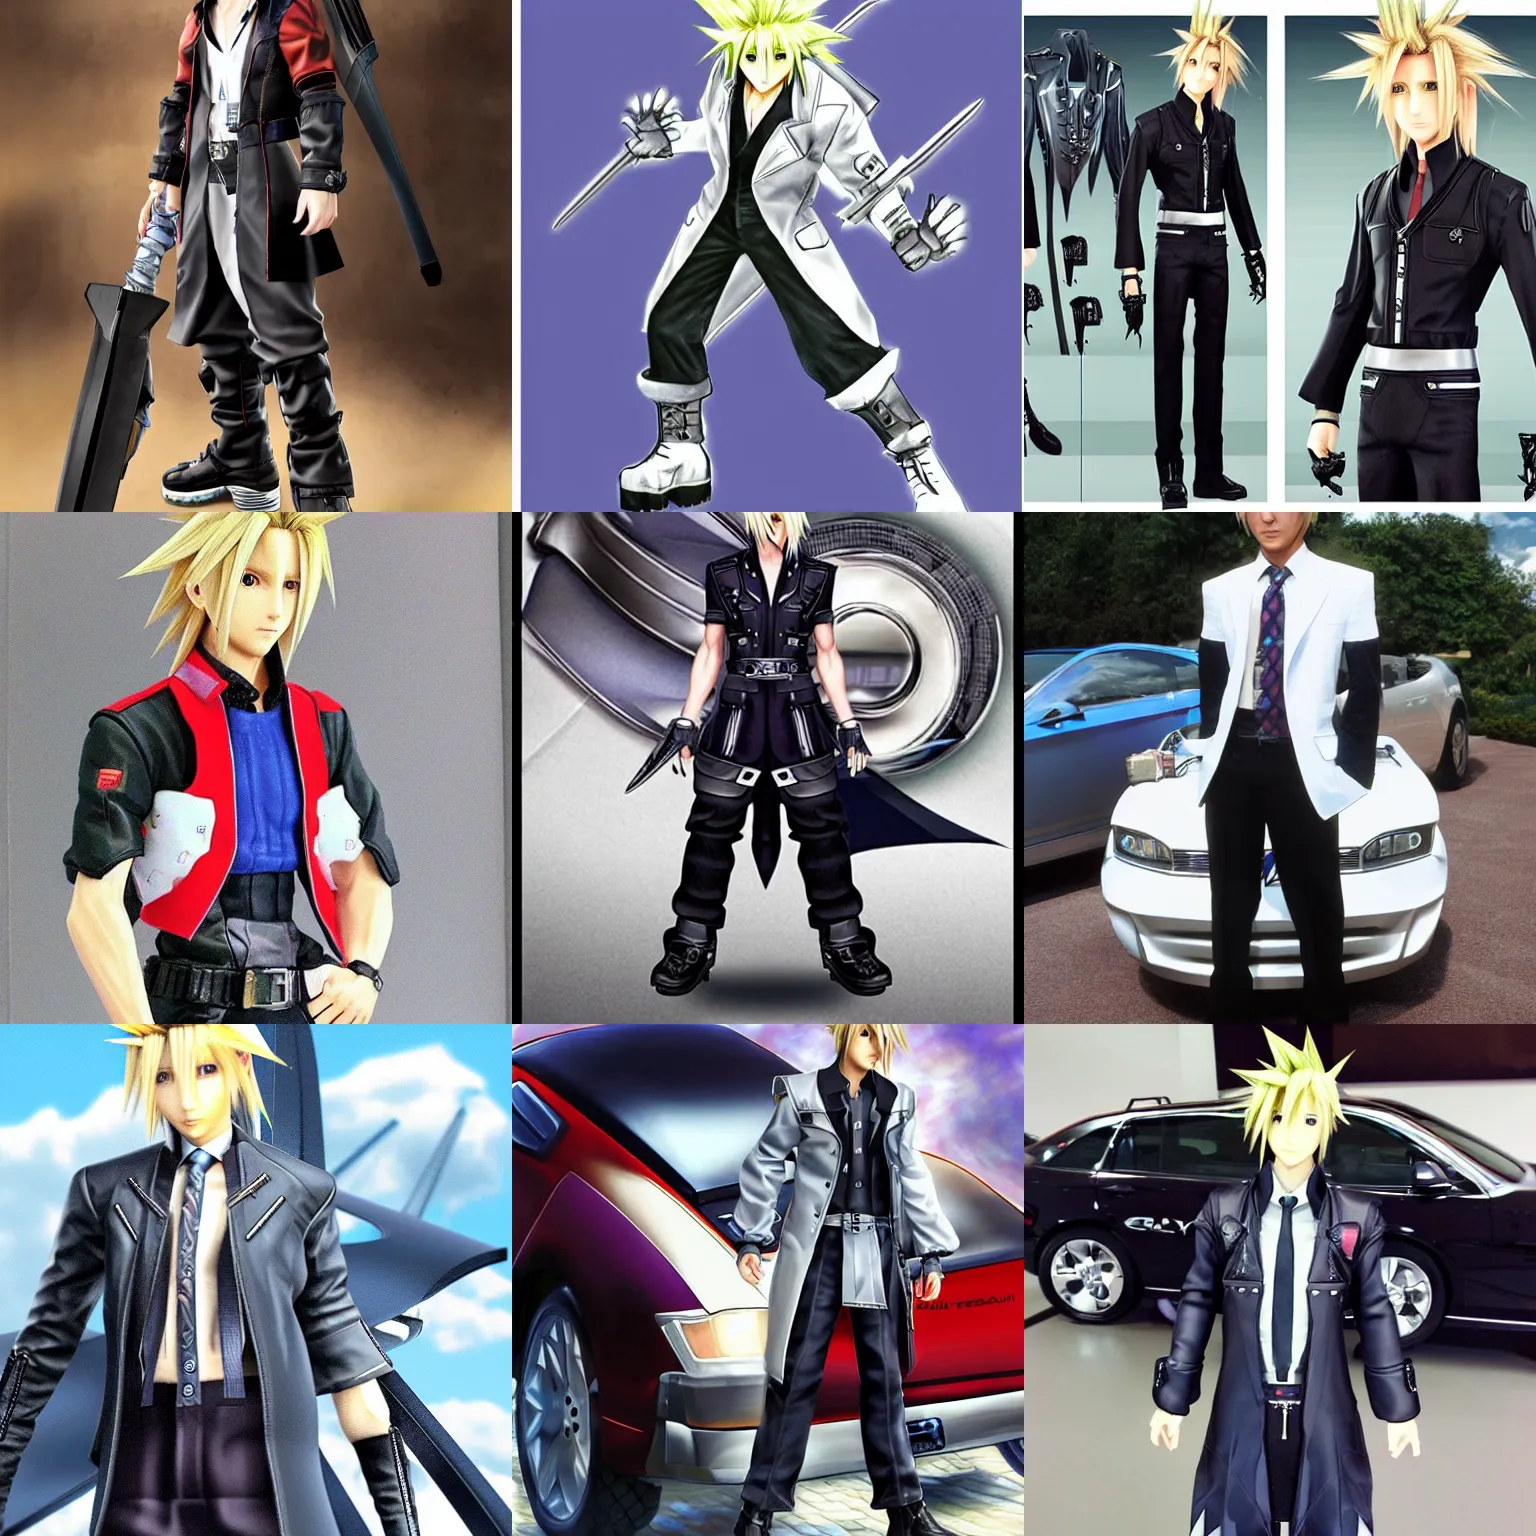 Prompt: cloud strife automobile salesman, tacky clothes, by tetsuya nomura